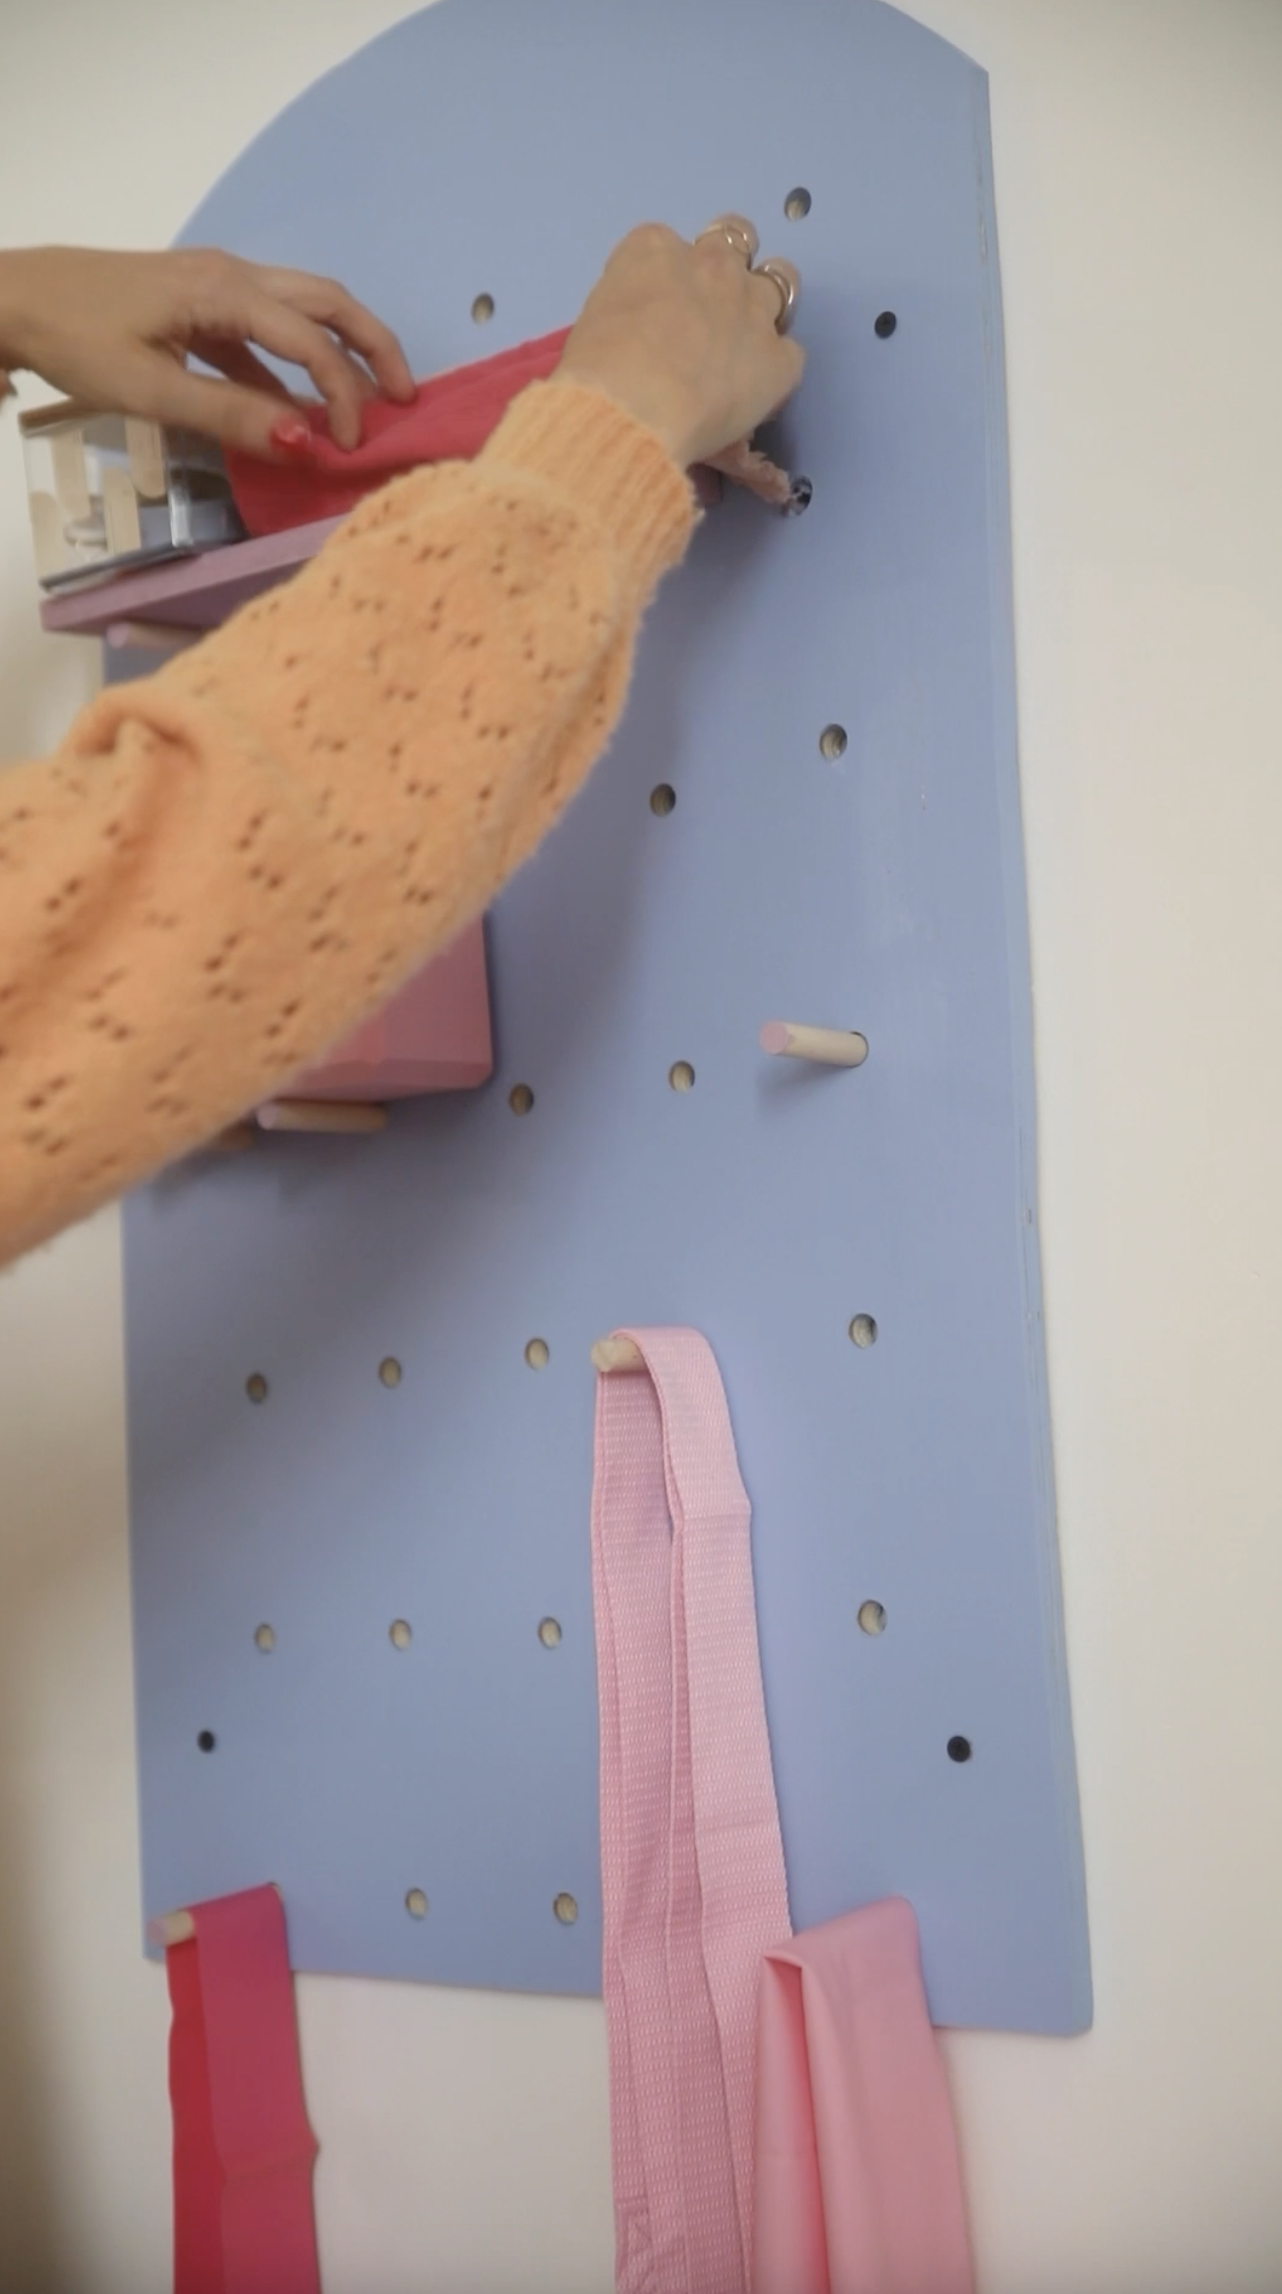 Organizing pilates accessories on pegboard on the wall